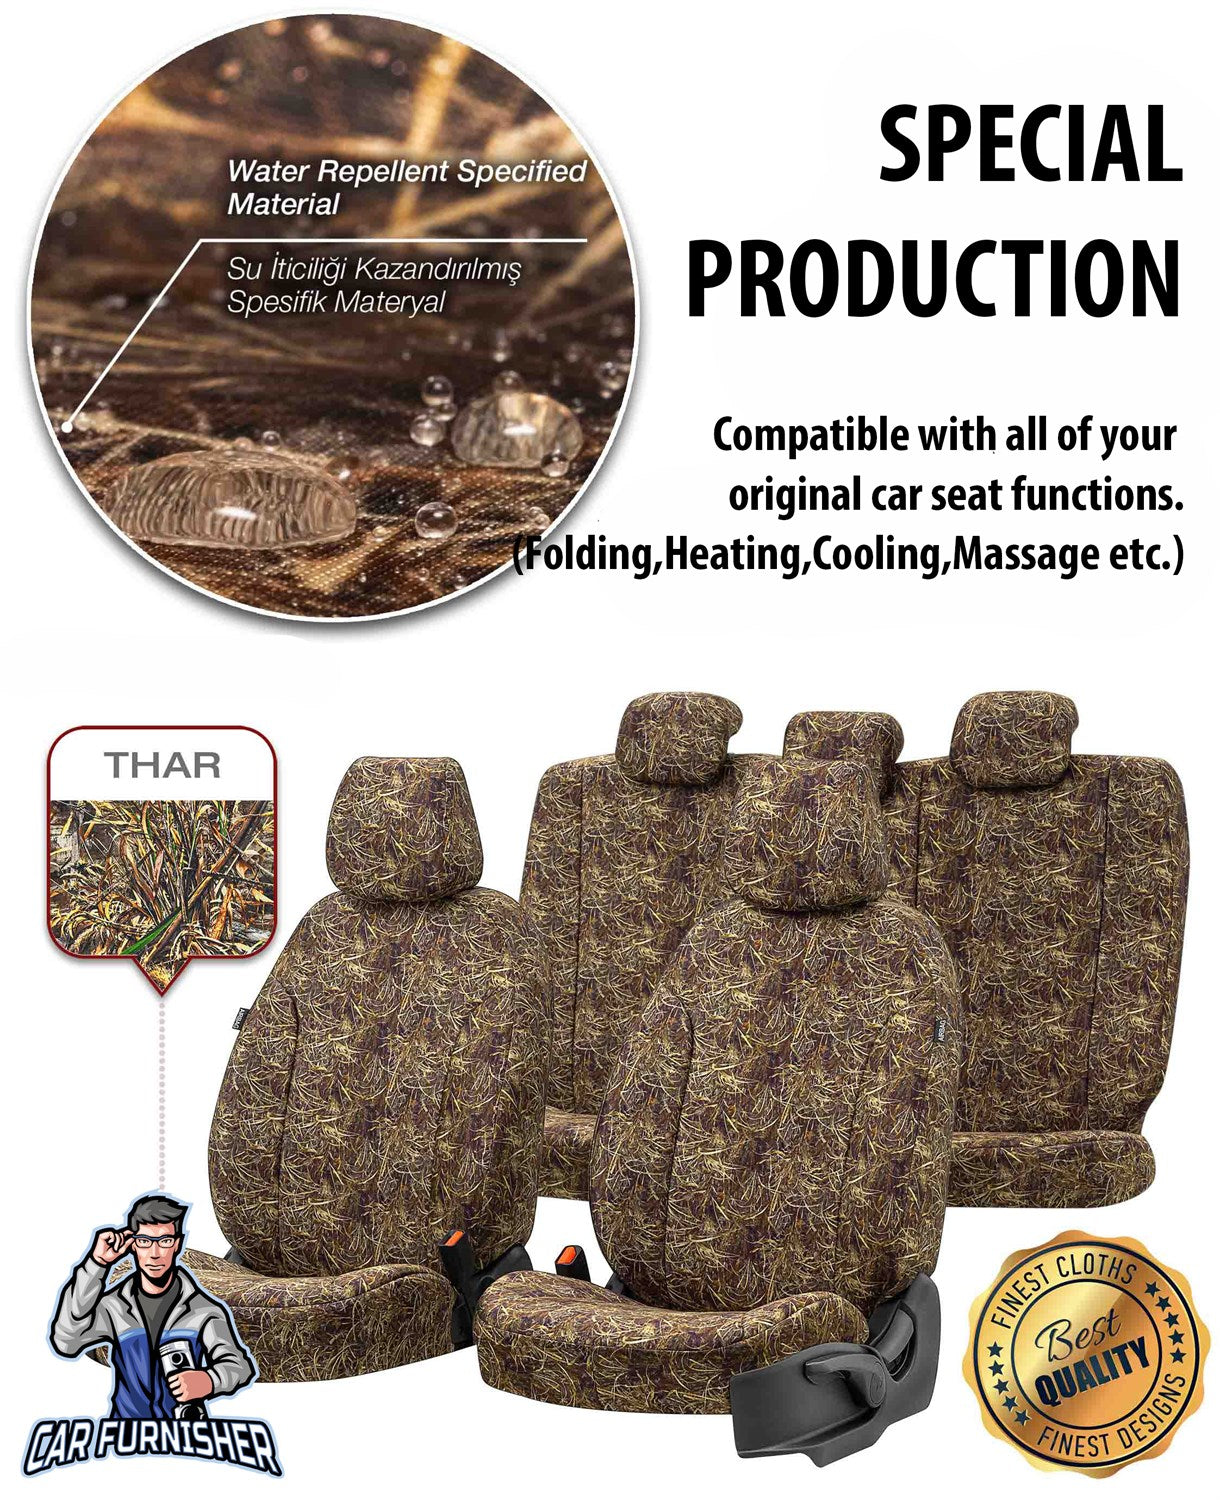 Ssangyong Musso Seat Covers Camouflage Waterproof Design Everest Camo Waterproof Fabric